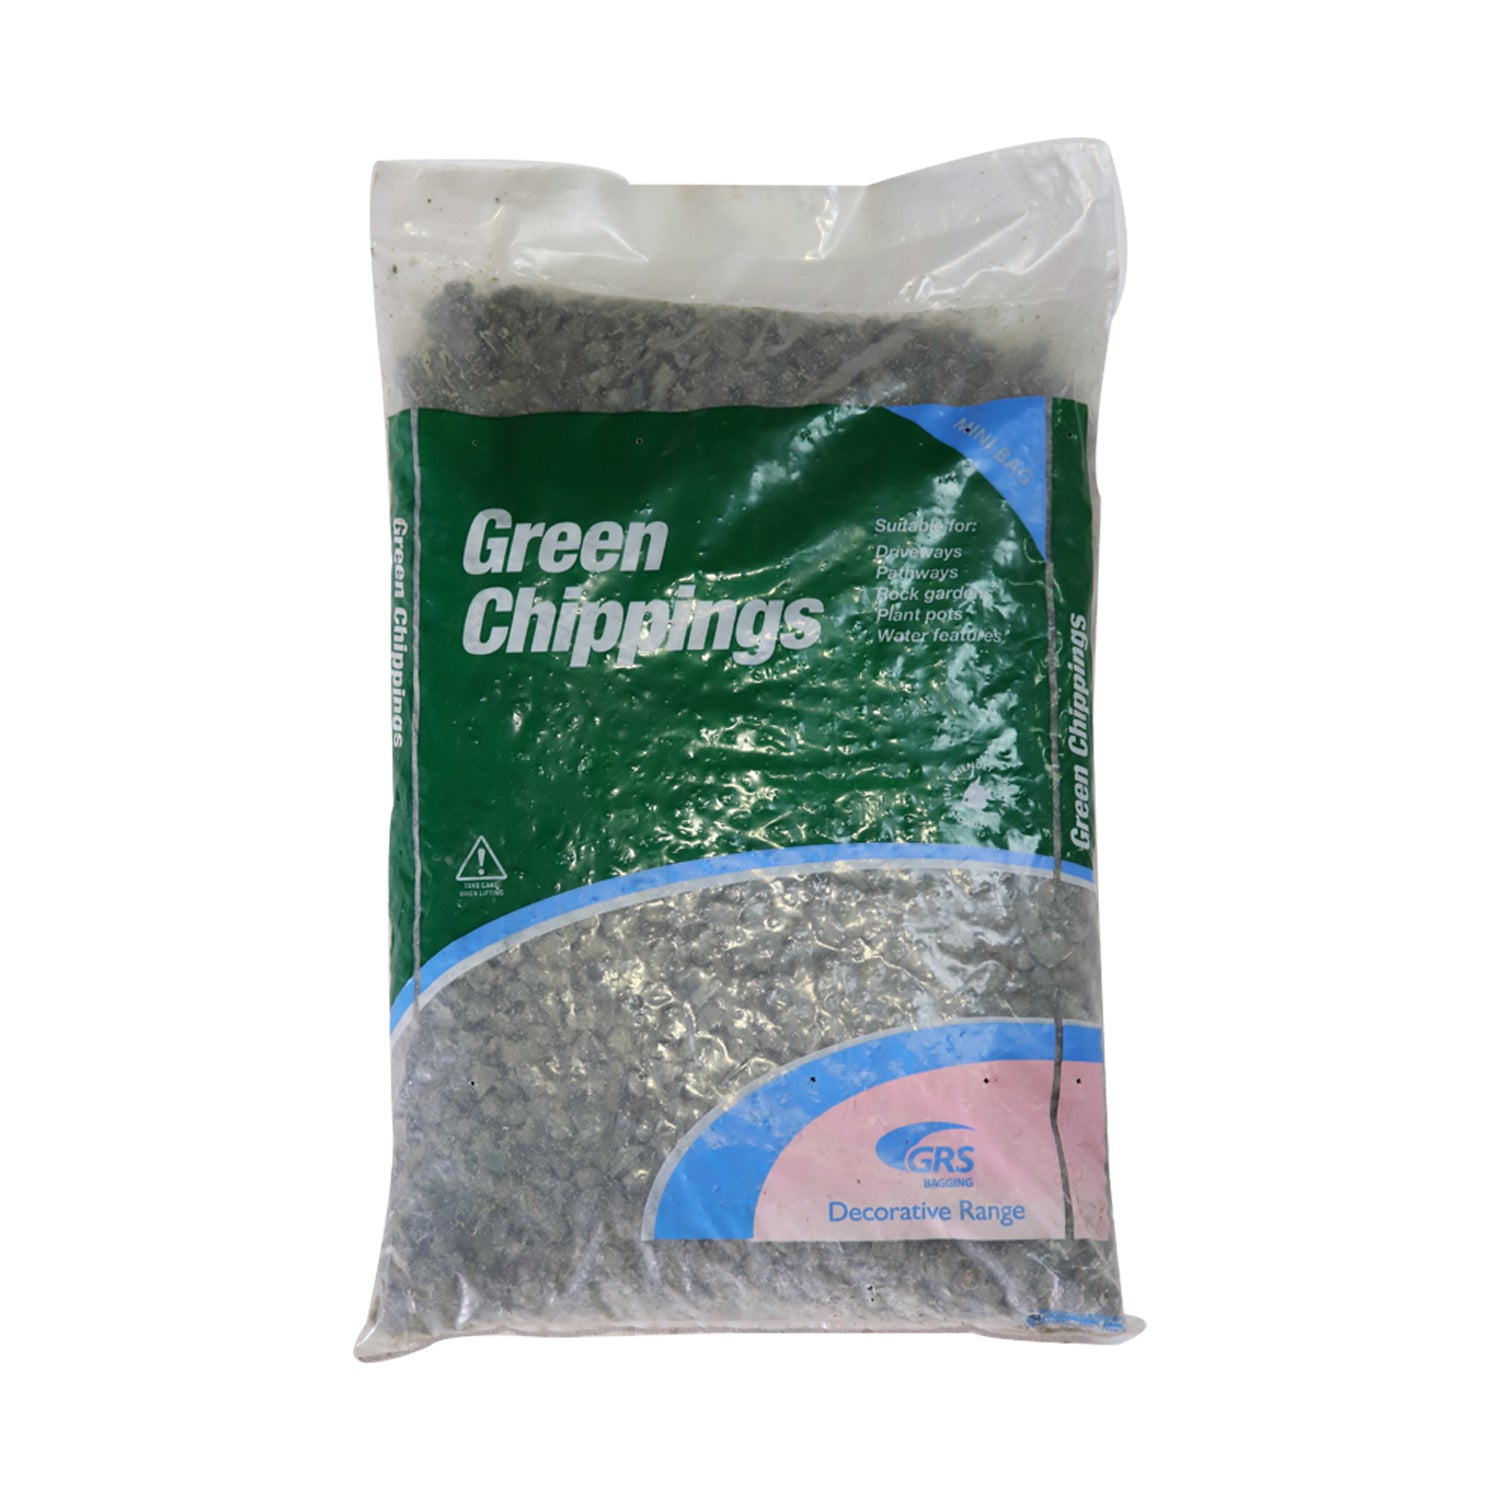 Green Chippings 25kg